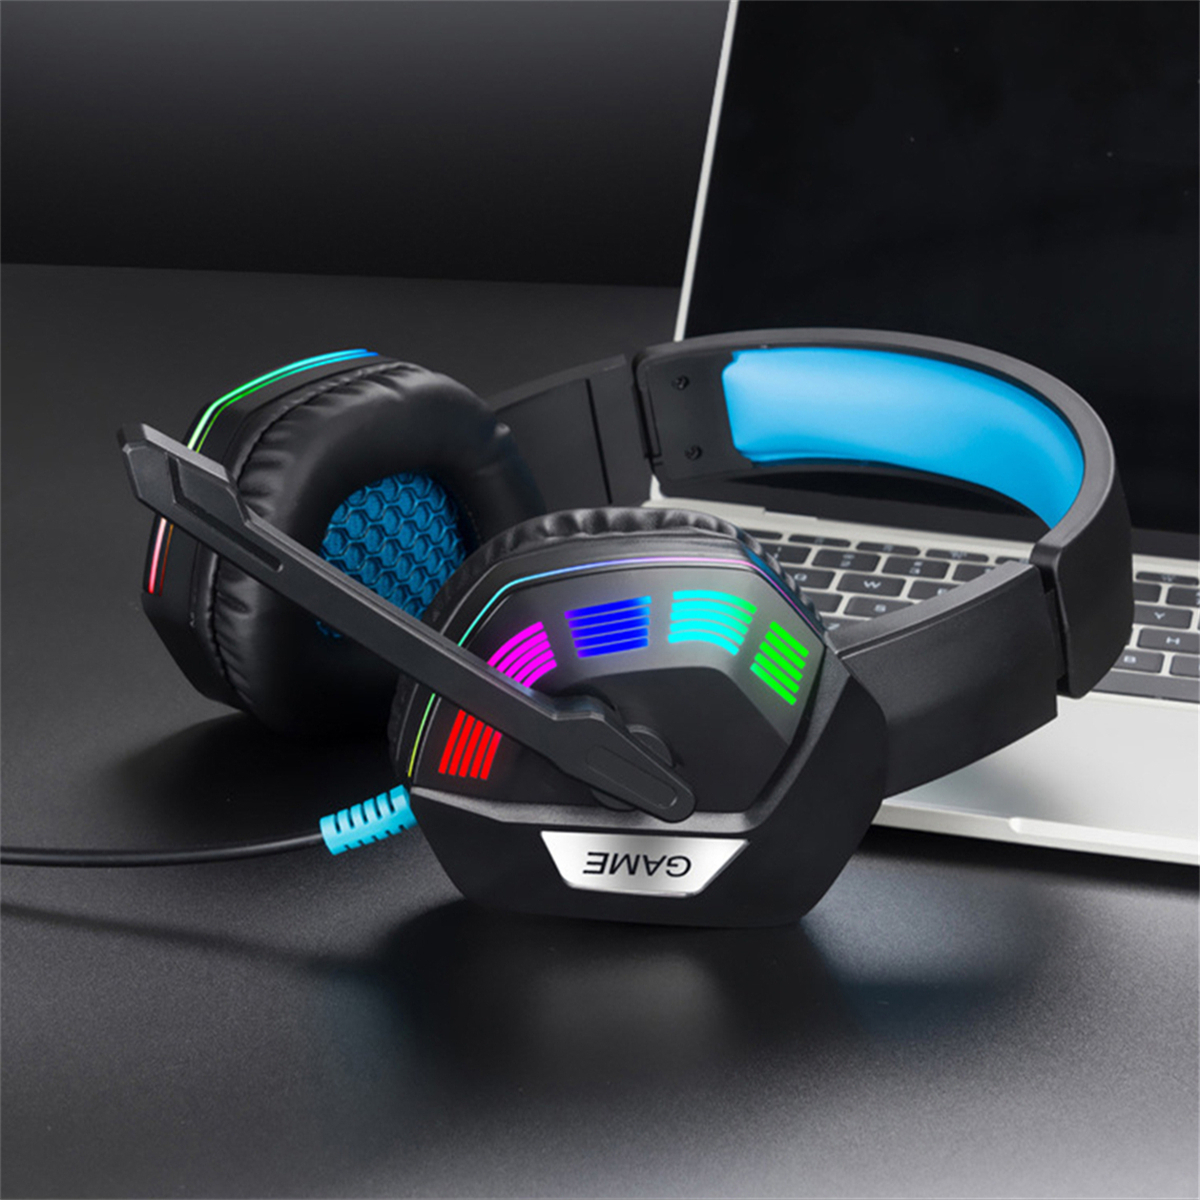 M1-Gaming-Headset-Surround-Sound-Music-Earphones-USB-71--35mm-Wired-RGB-Backlight-Game-Headphones-wi-1827492-24